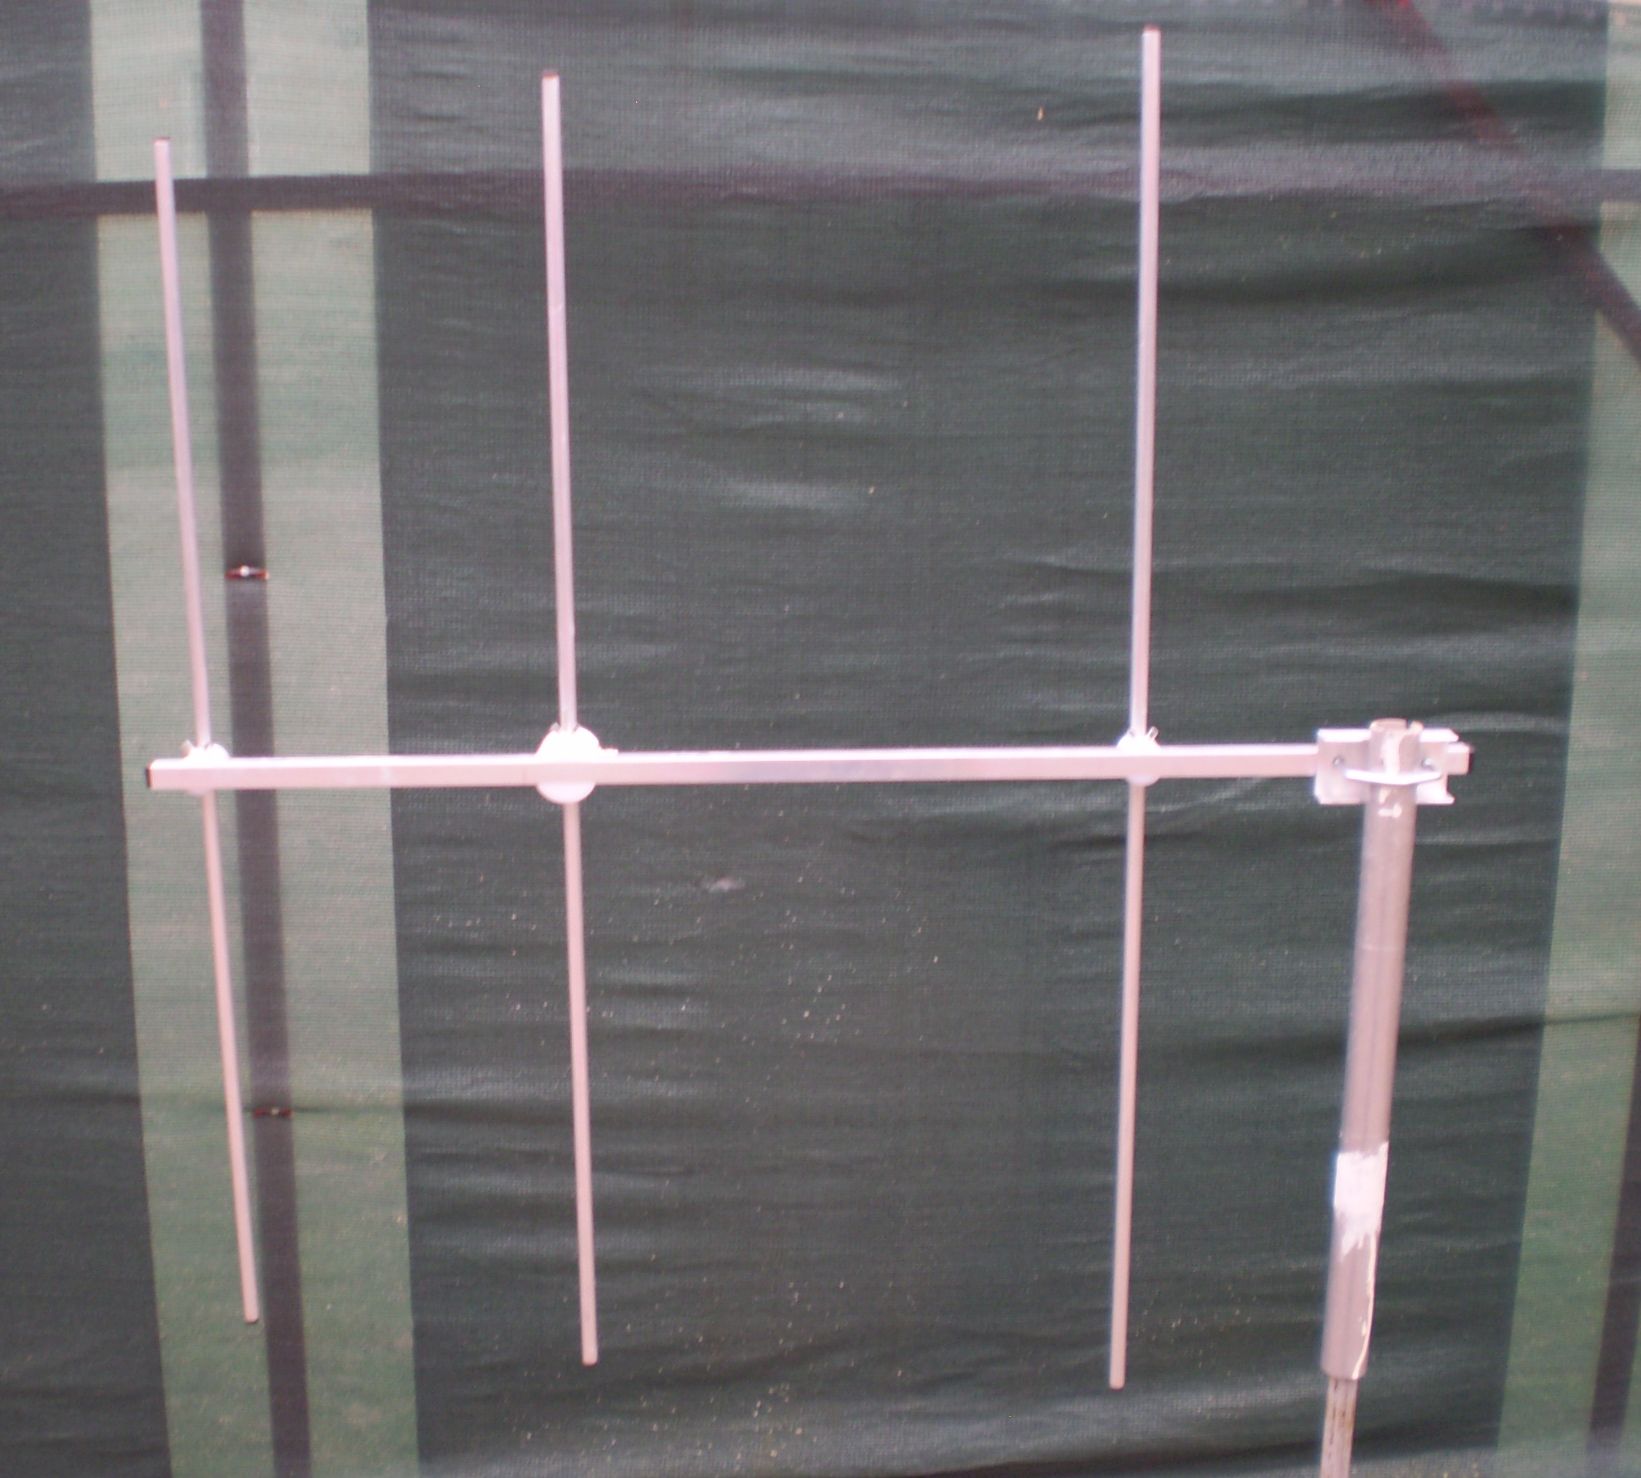 3 ELEMENT YAGI FOR VHF FREQUENCIES RX ONLY